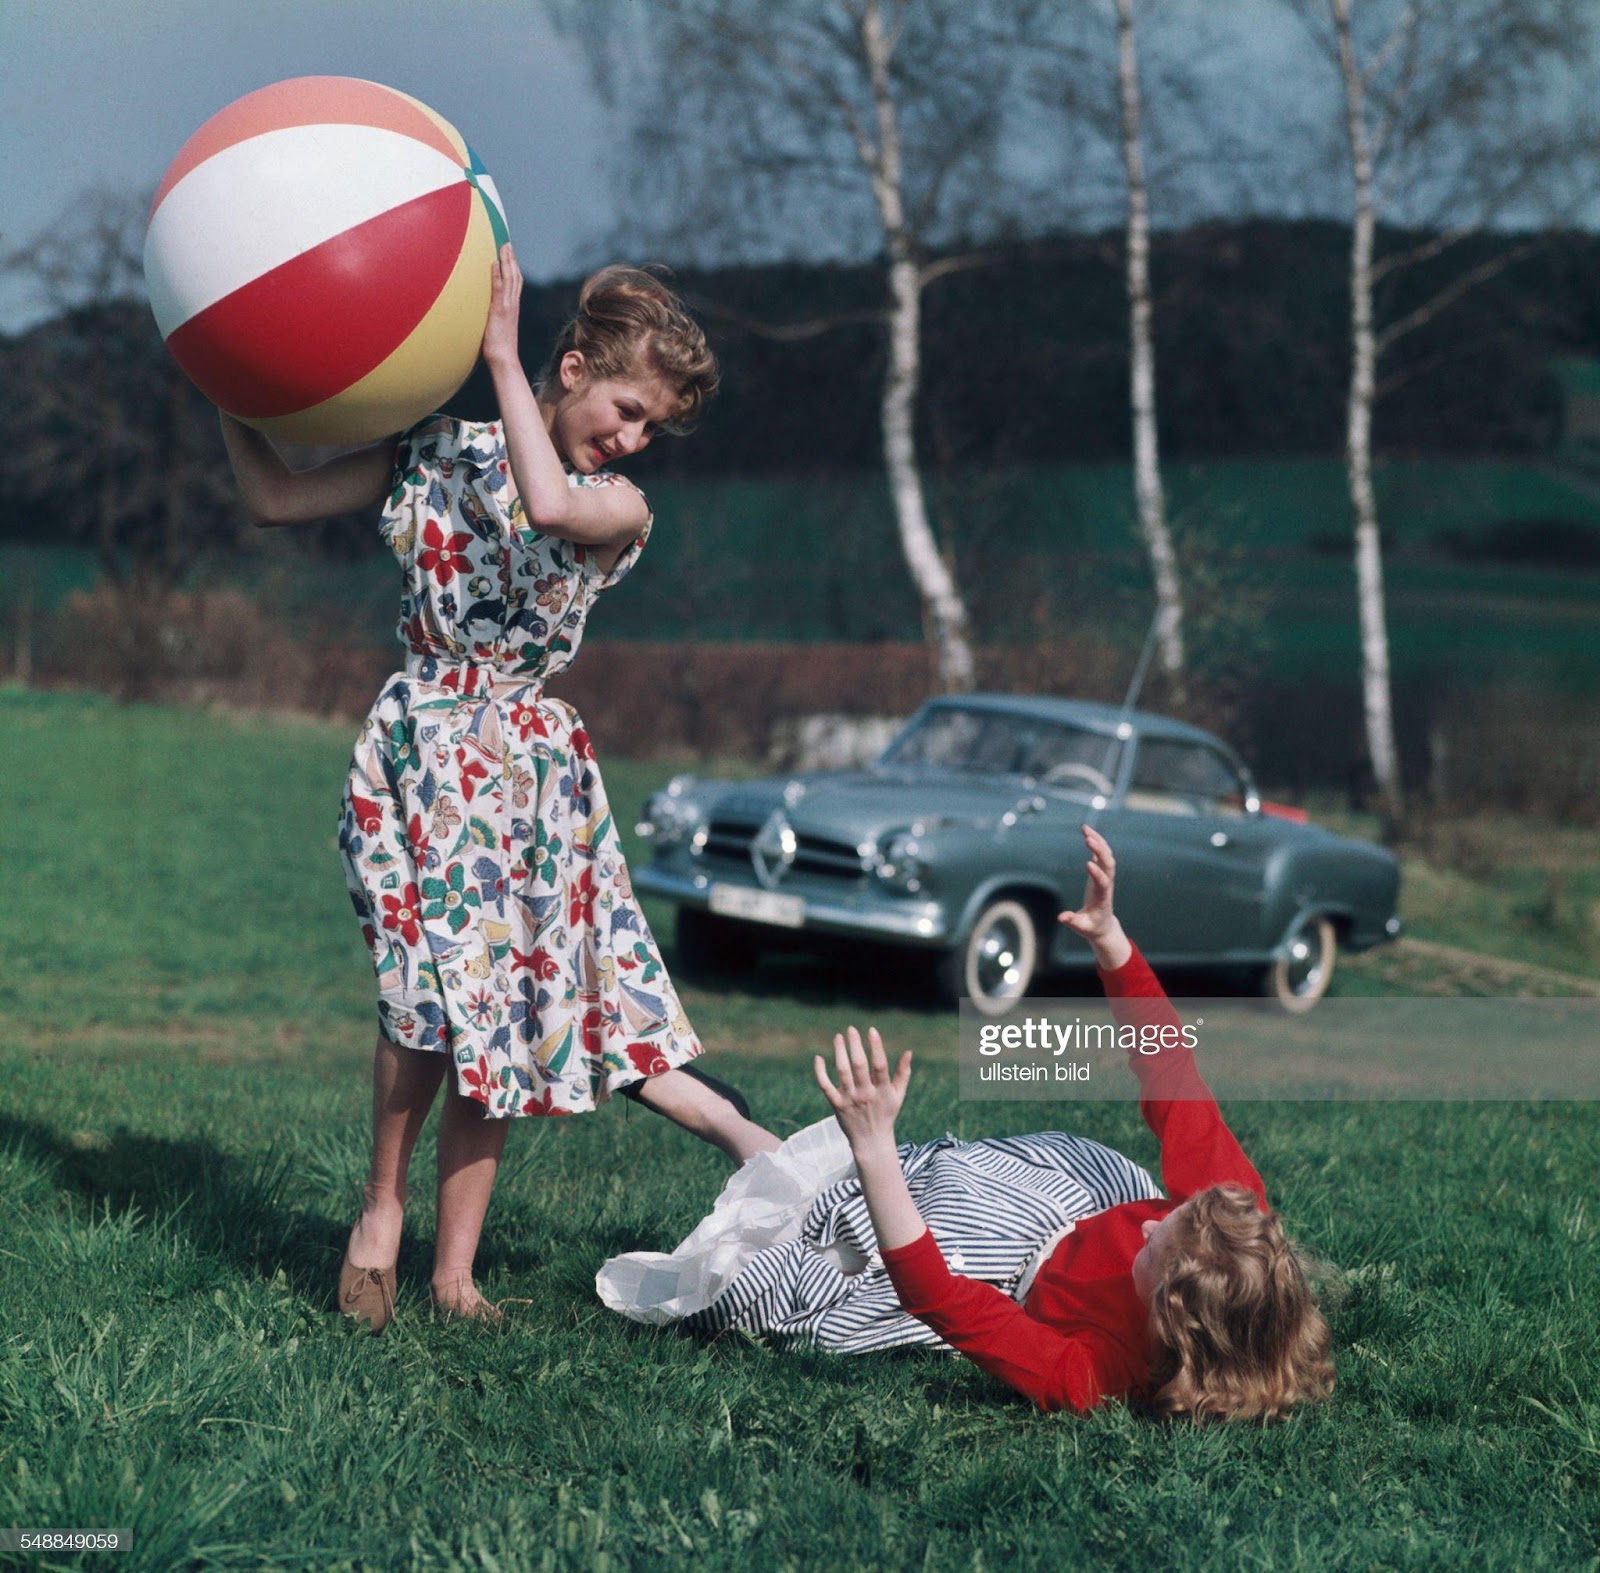 C:\Users\Valerio\Desktop\1950's germany-bavaria-two-young-women-are-playing-with-a-beach-ball-on-a-picture-id548849059.jpg